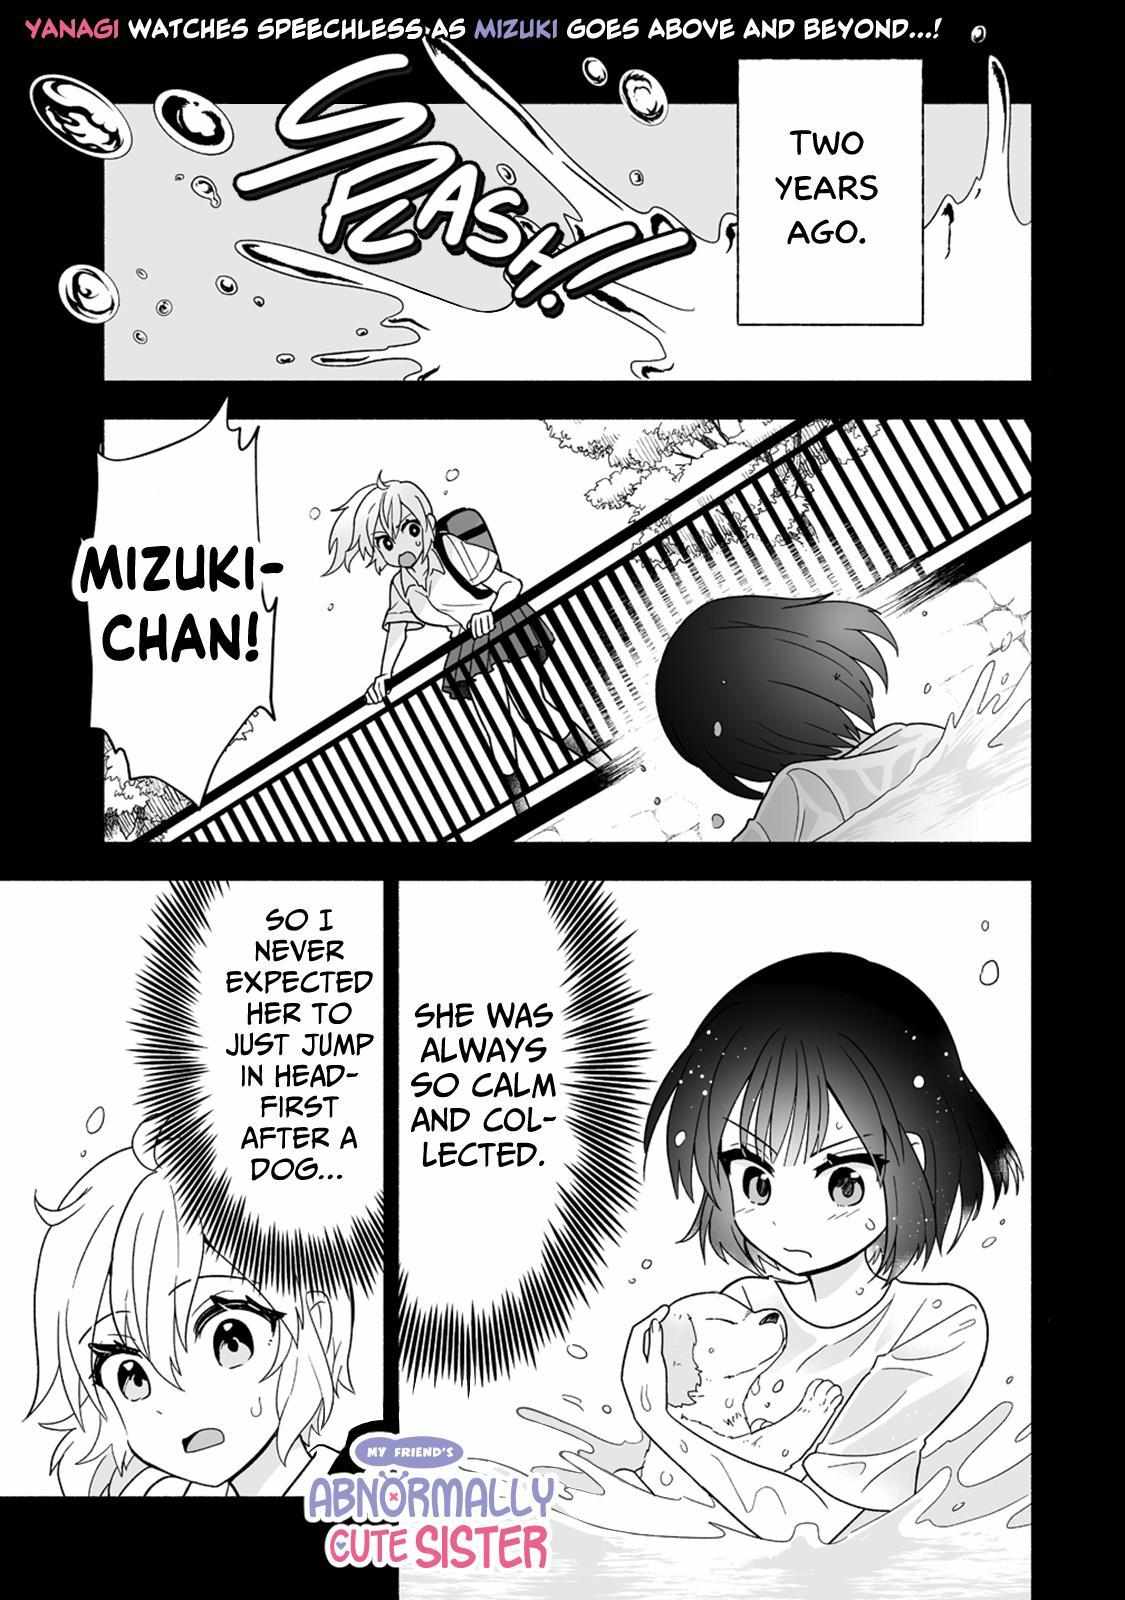 My Friend's Abnormally Cute Sister - chapter 2 - #1